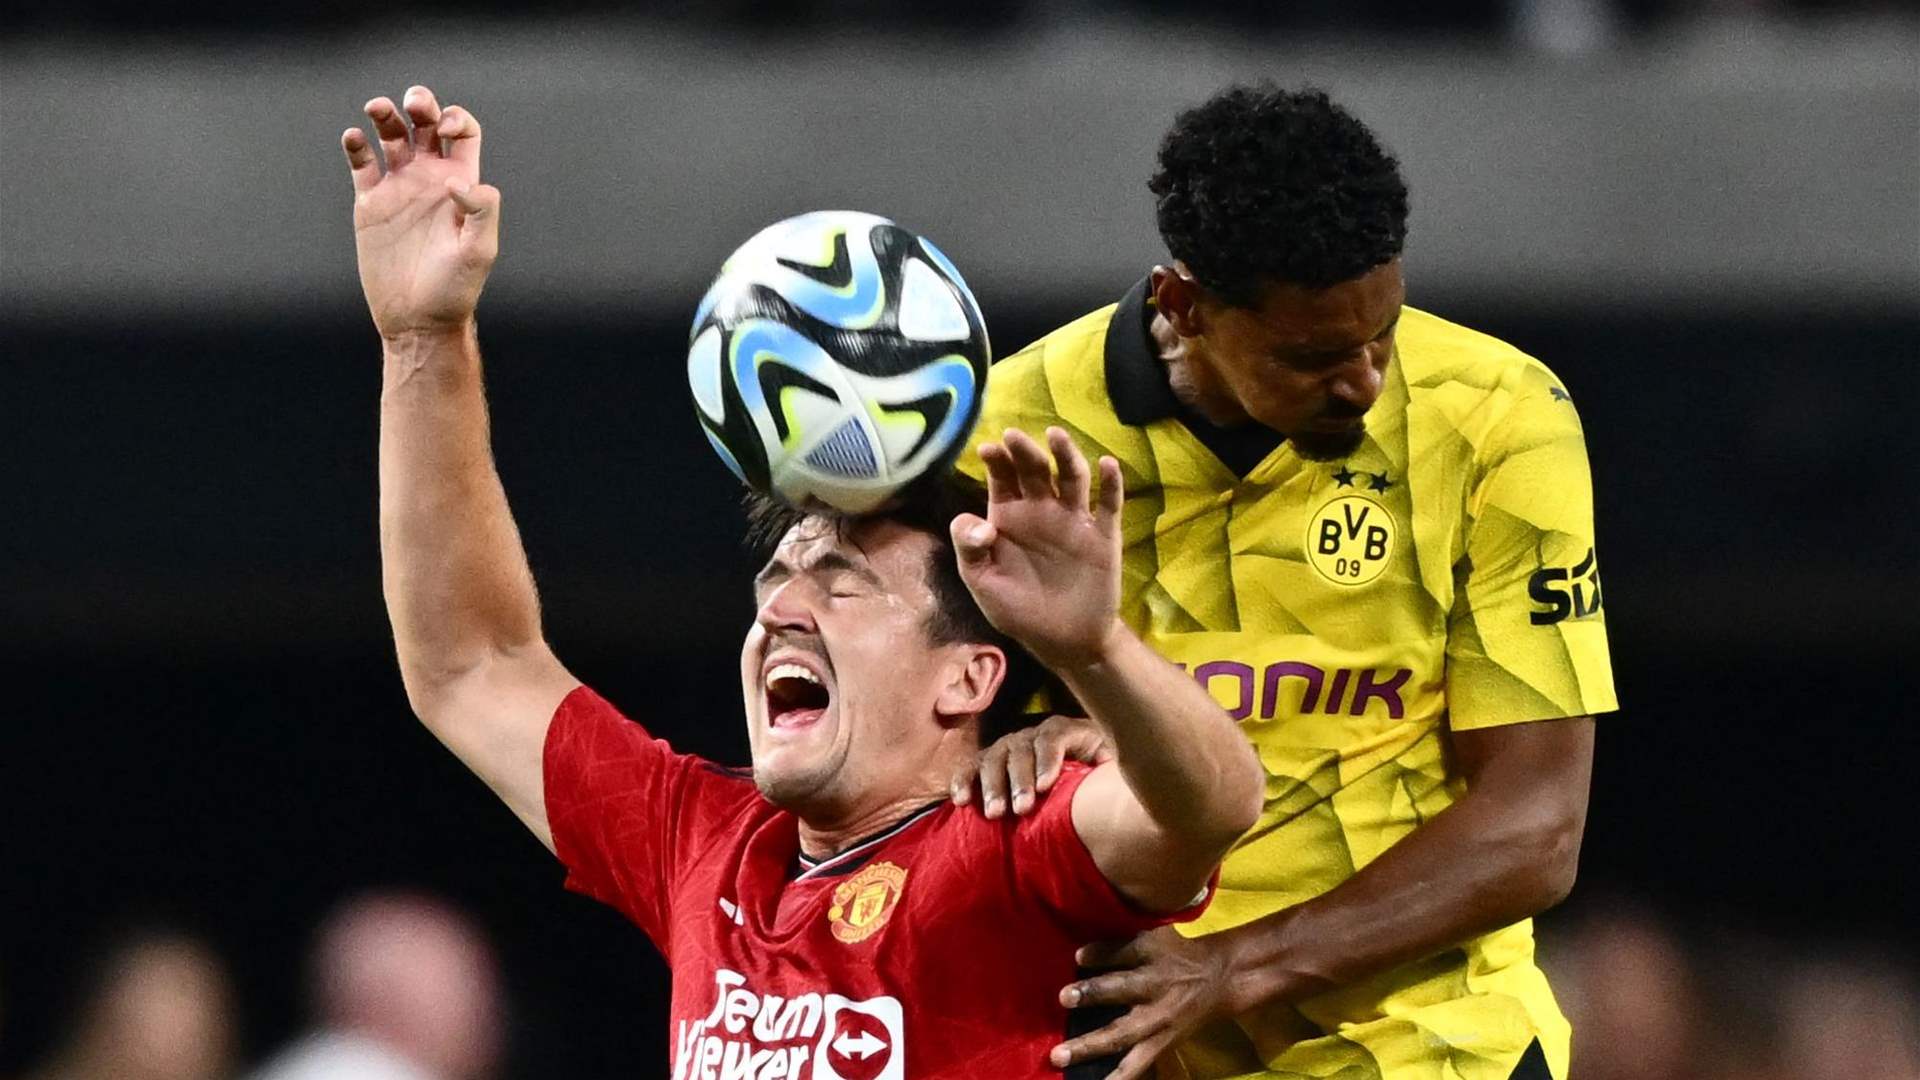 Man Utd conclude US tour with 2-3 loss to Borussia Dortmund